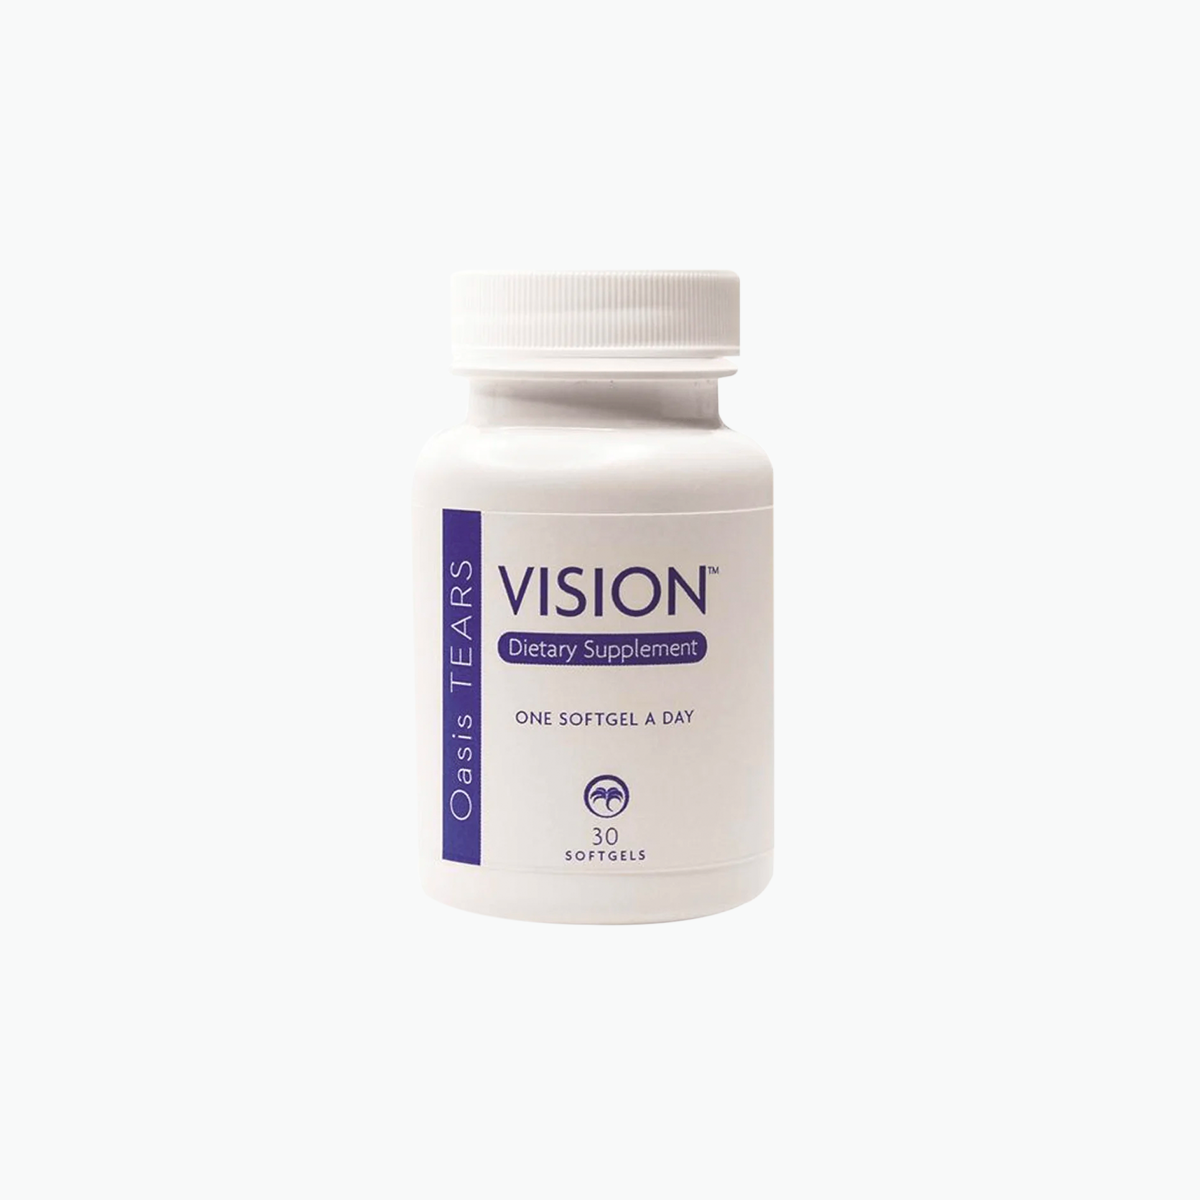 Oasis Tears Vision Daily Dietary Supplement (30ct softgels)